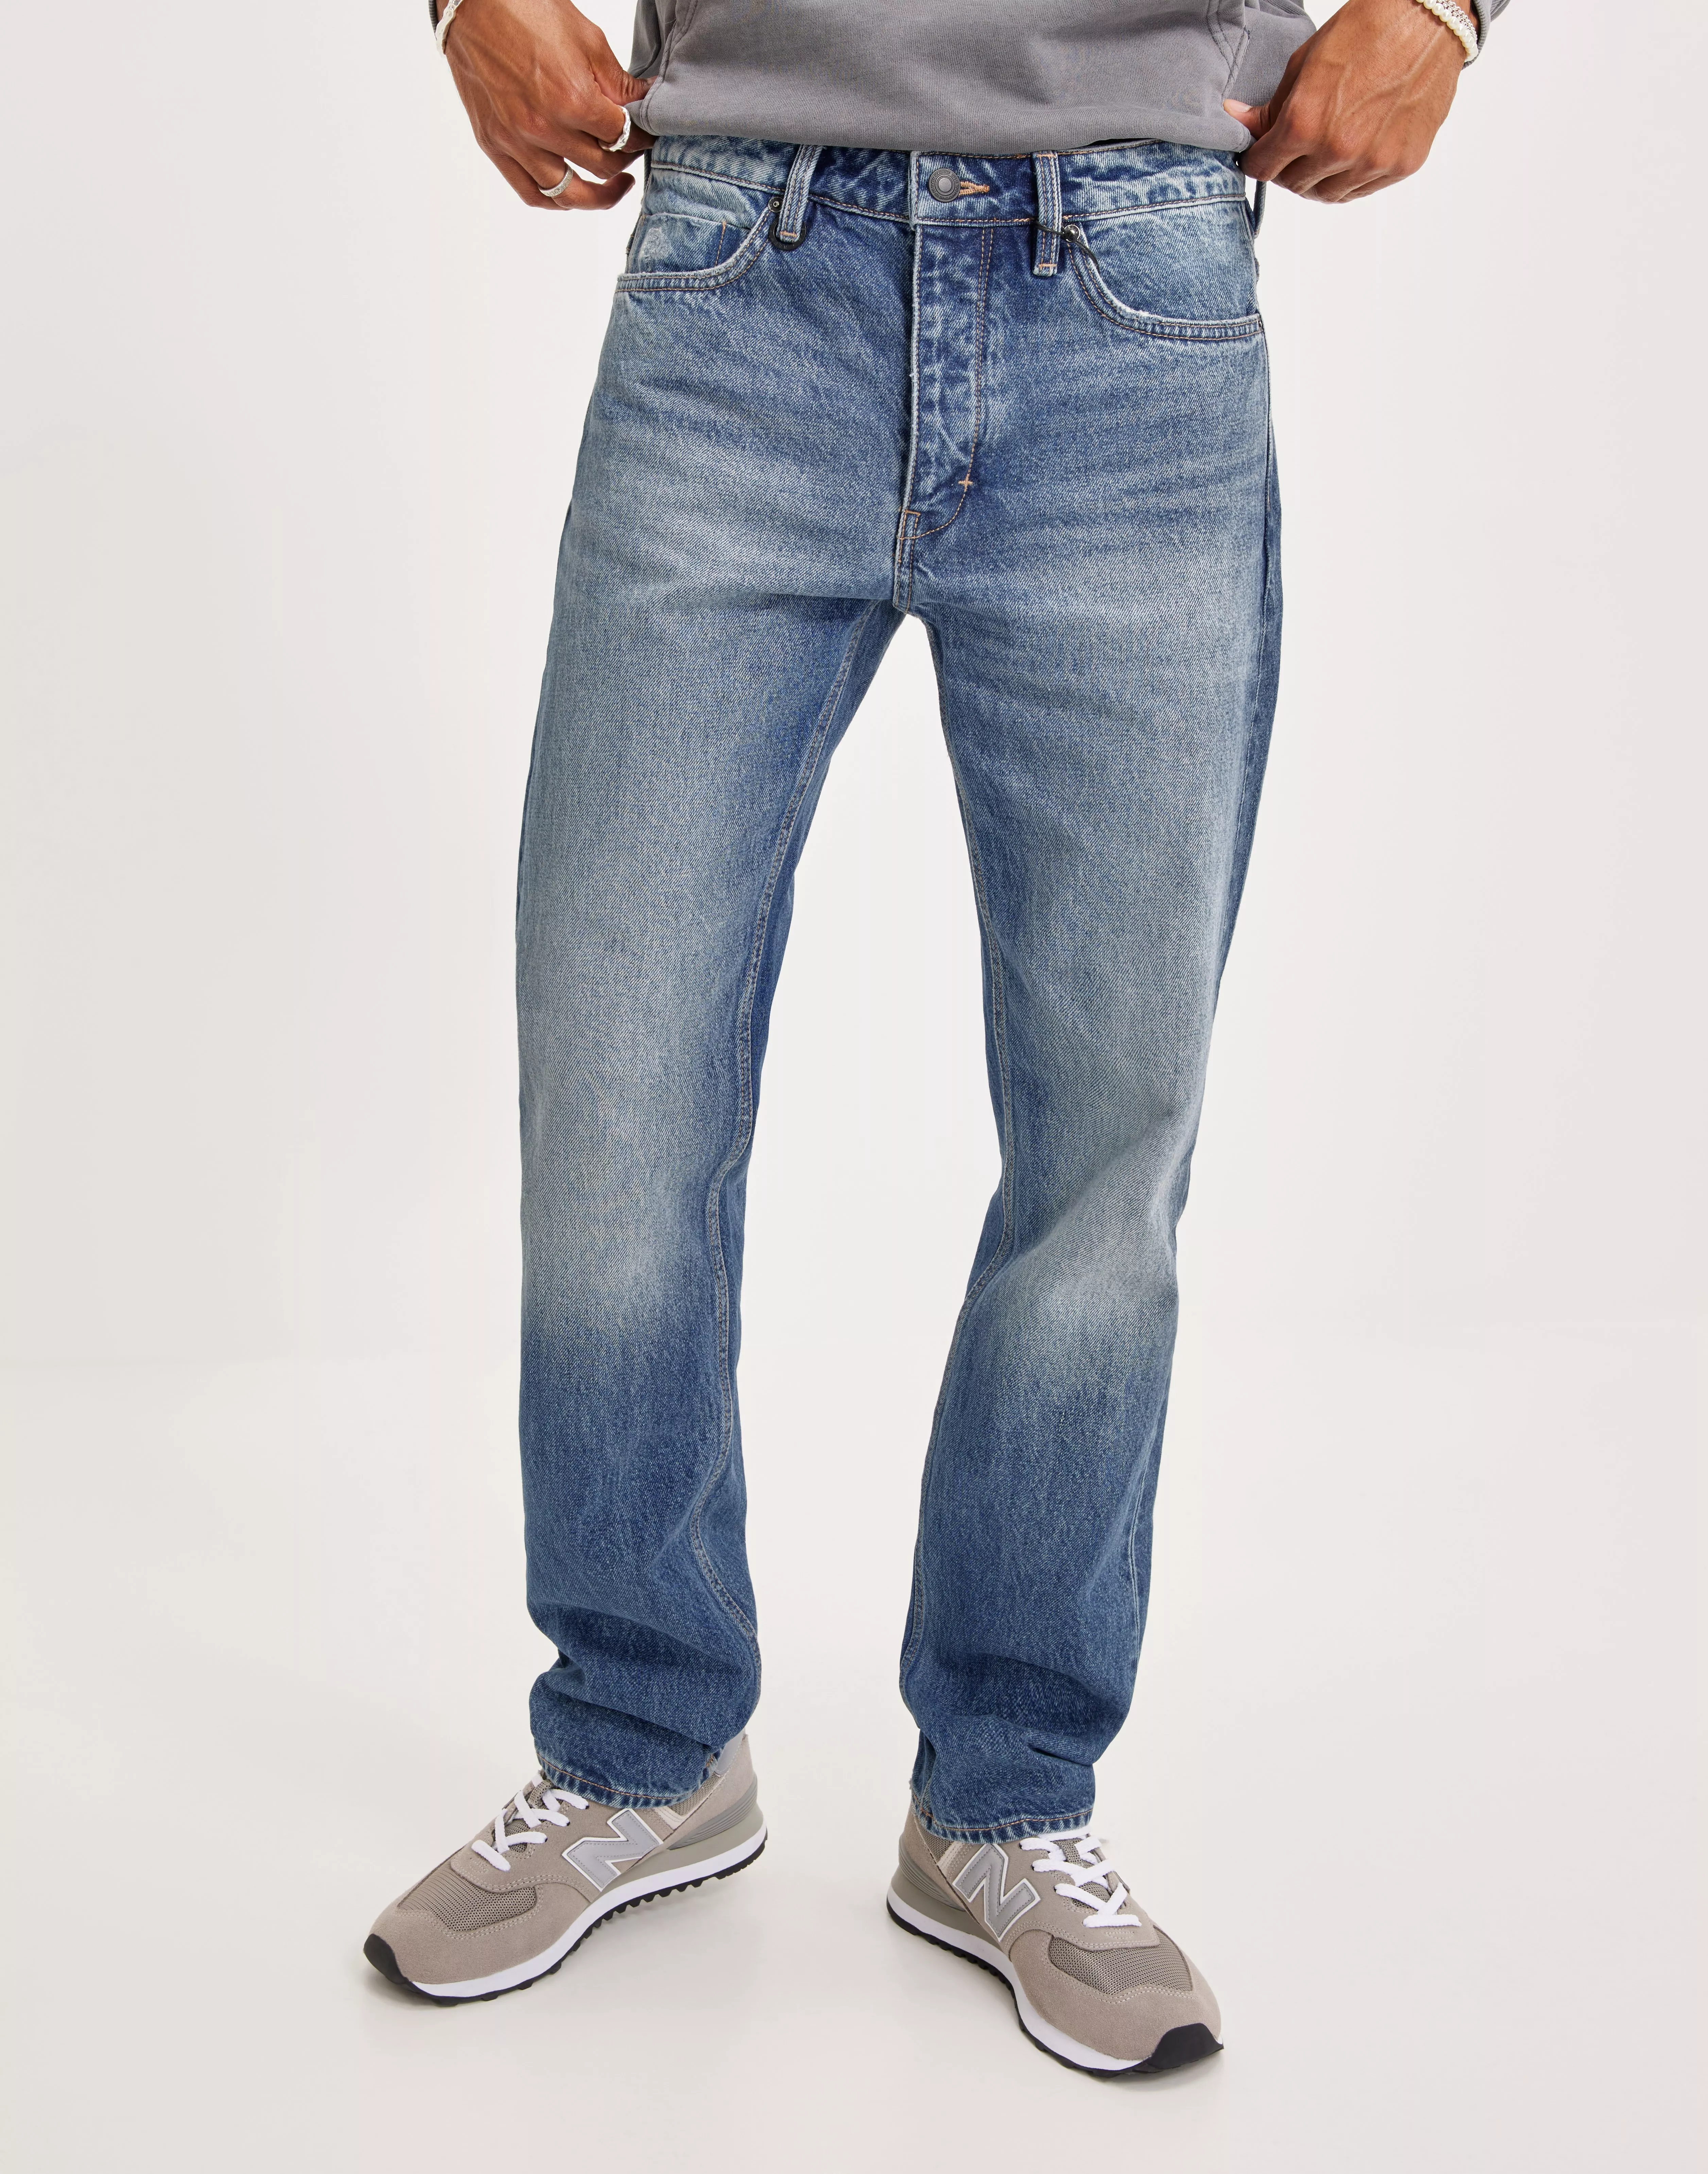 Neuw Studio Relaxed Straight jeans Disruption product